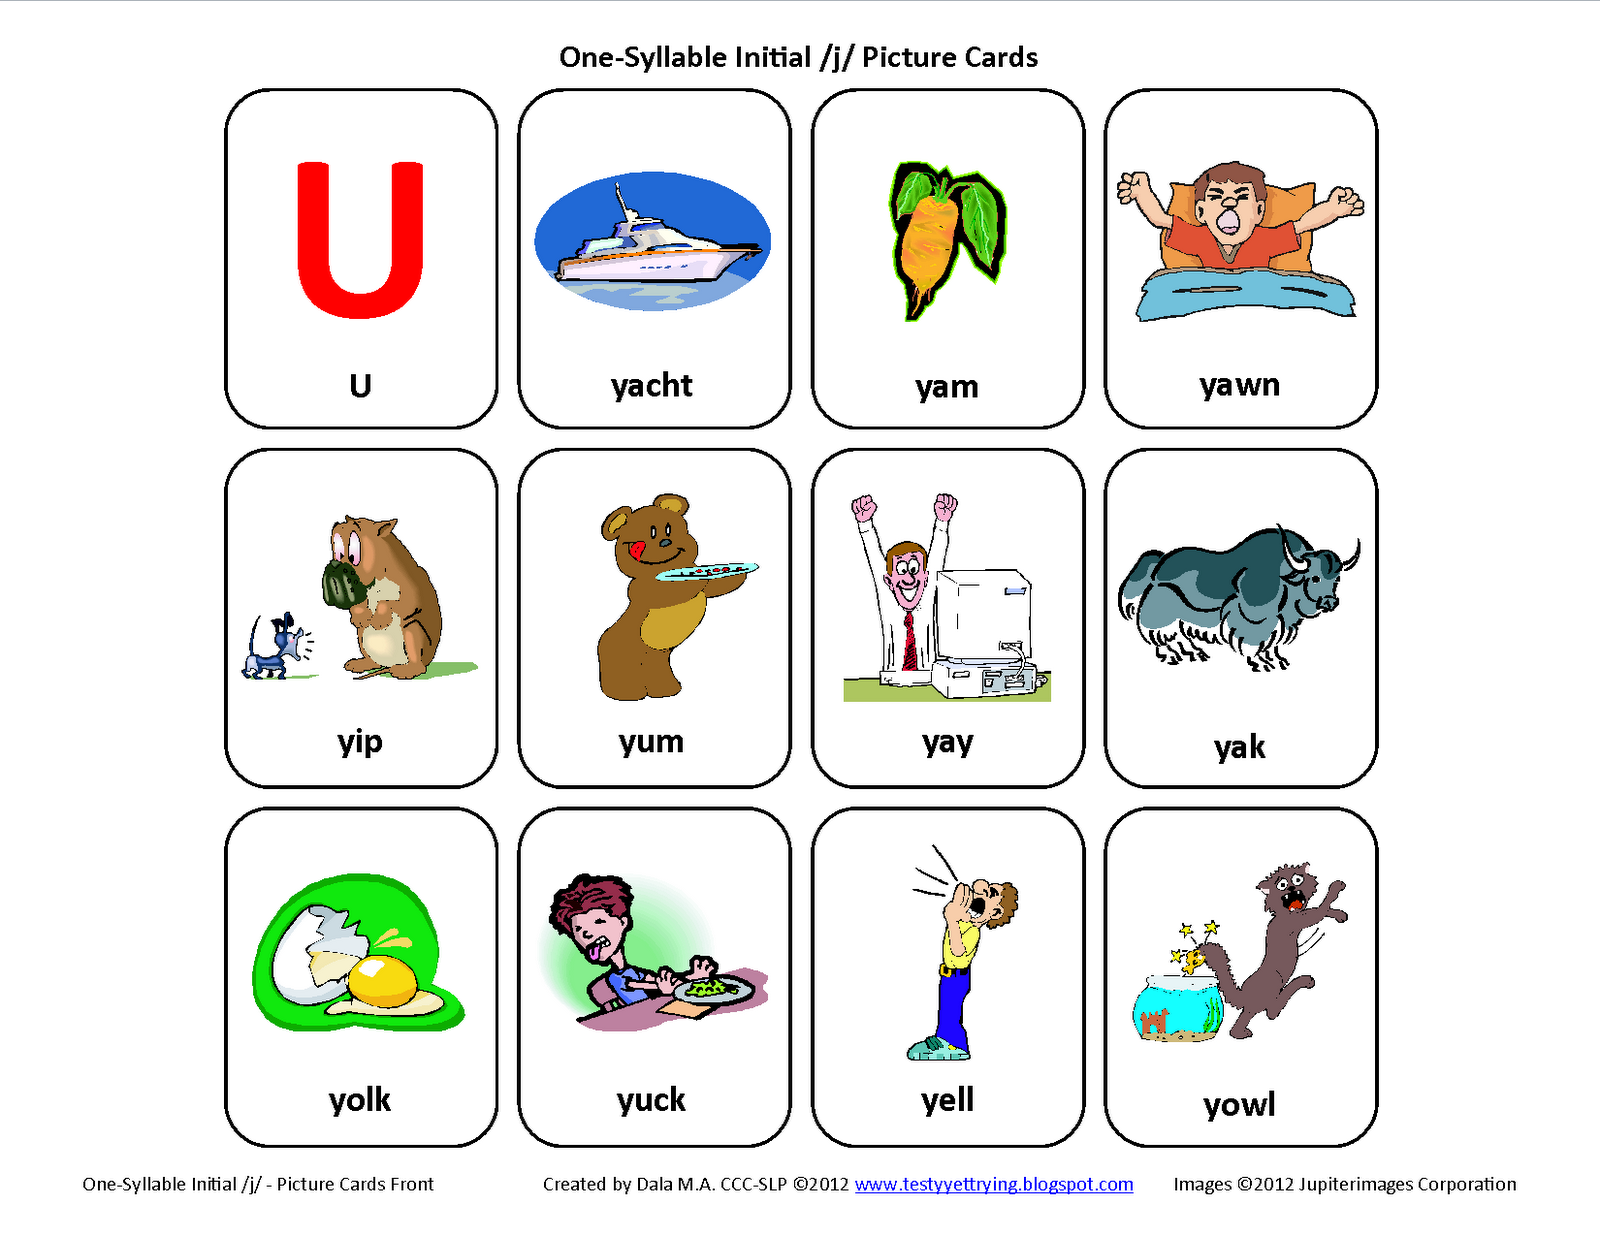 Английские слова й. Words with y. Letter y Words. Words with Letter y. Words with y for Kids.